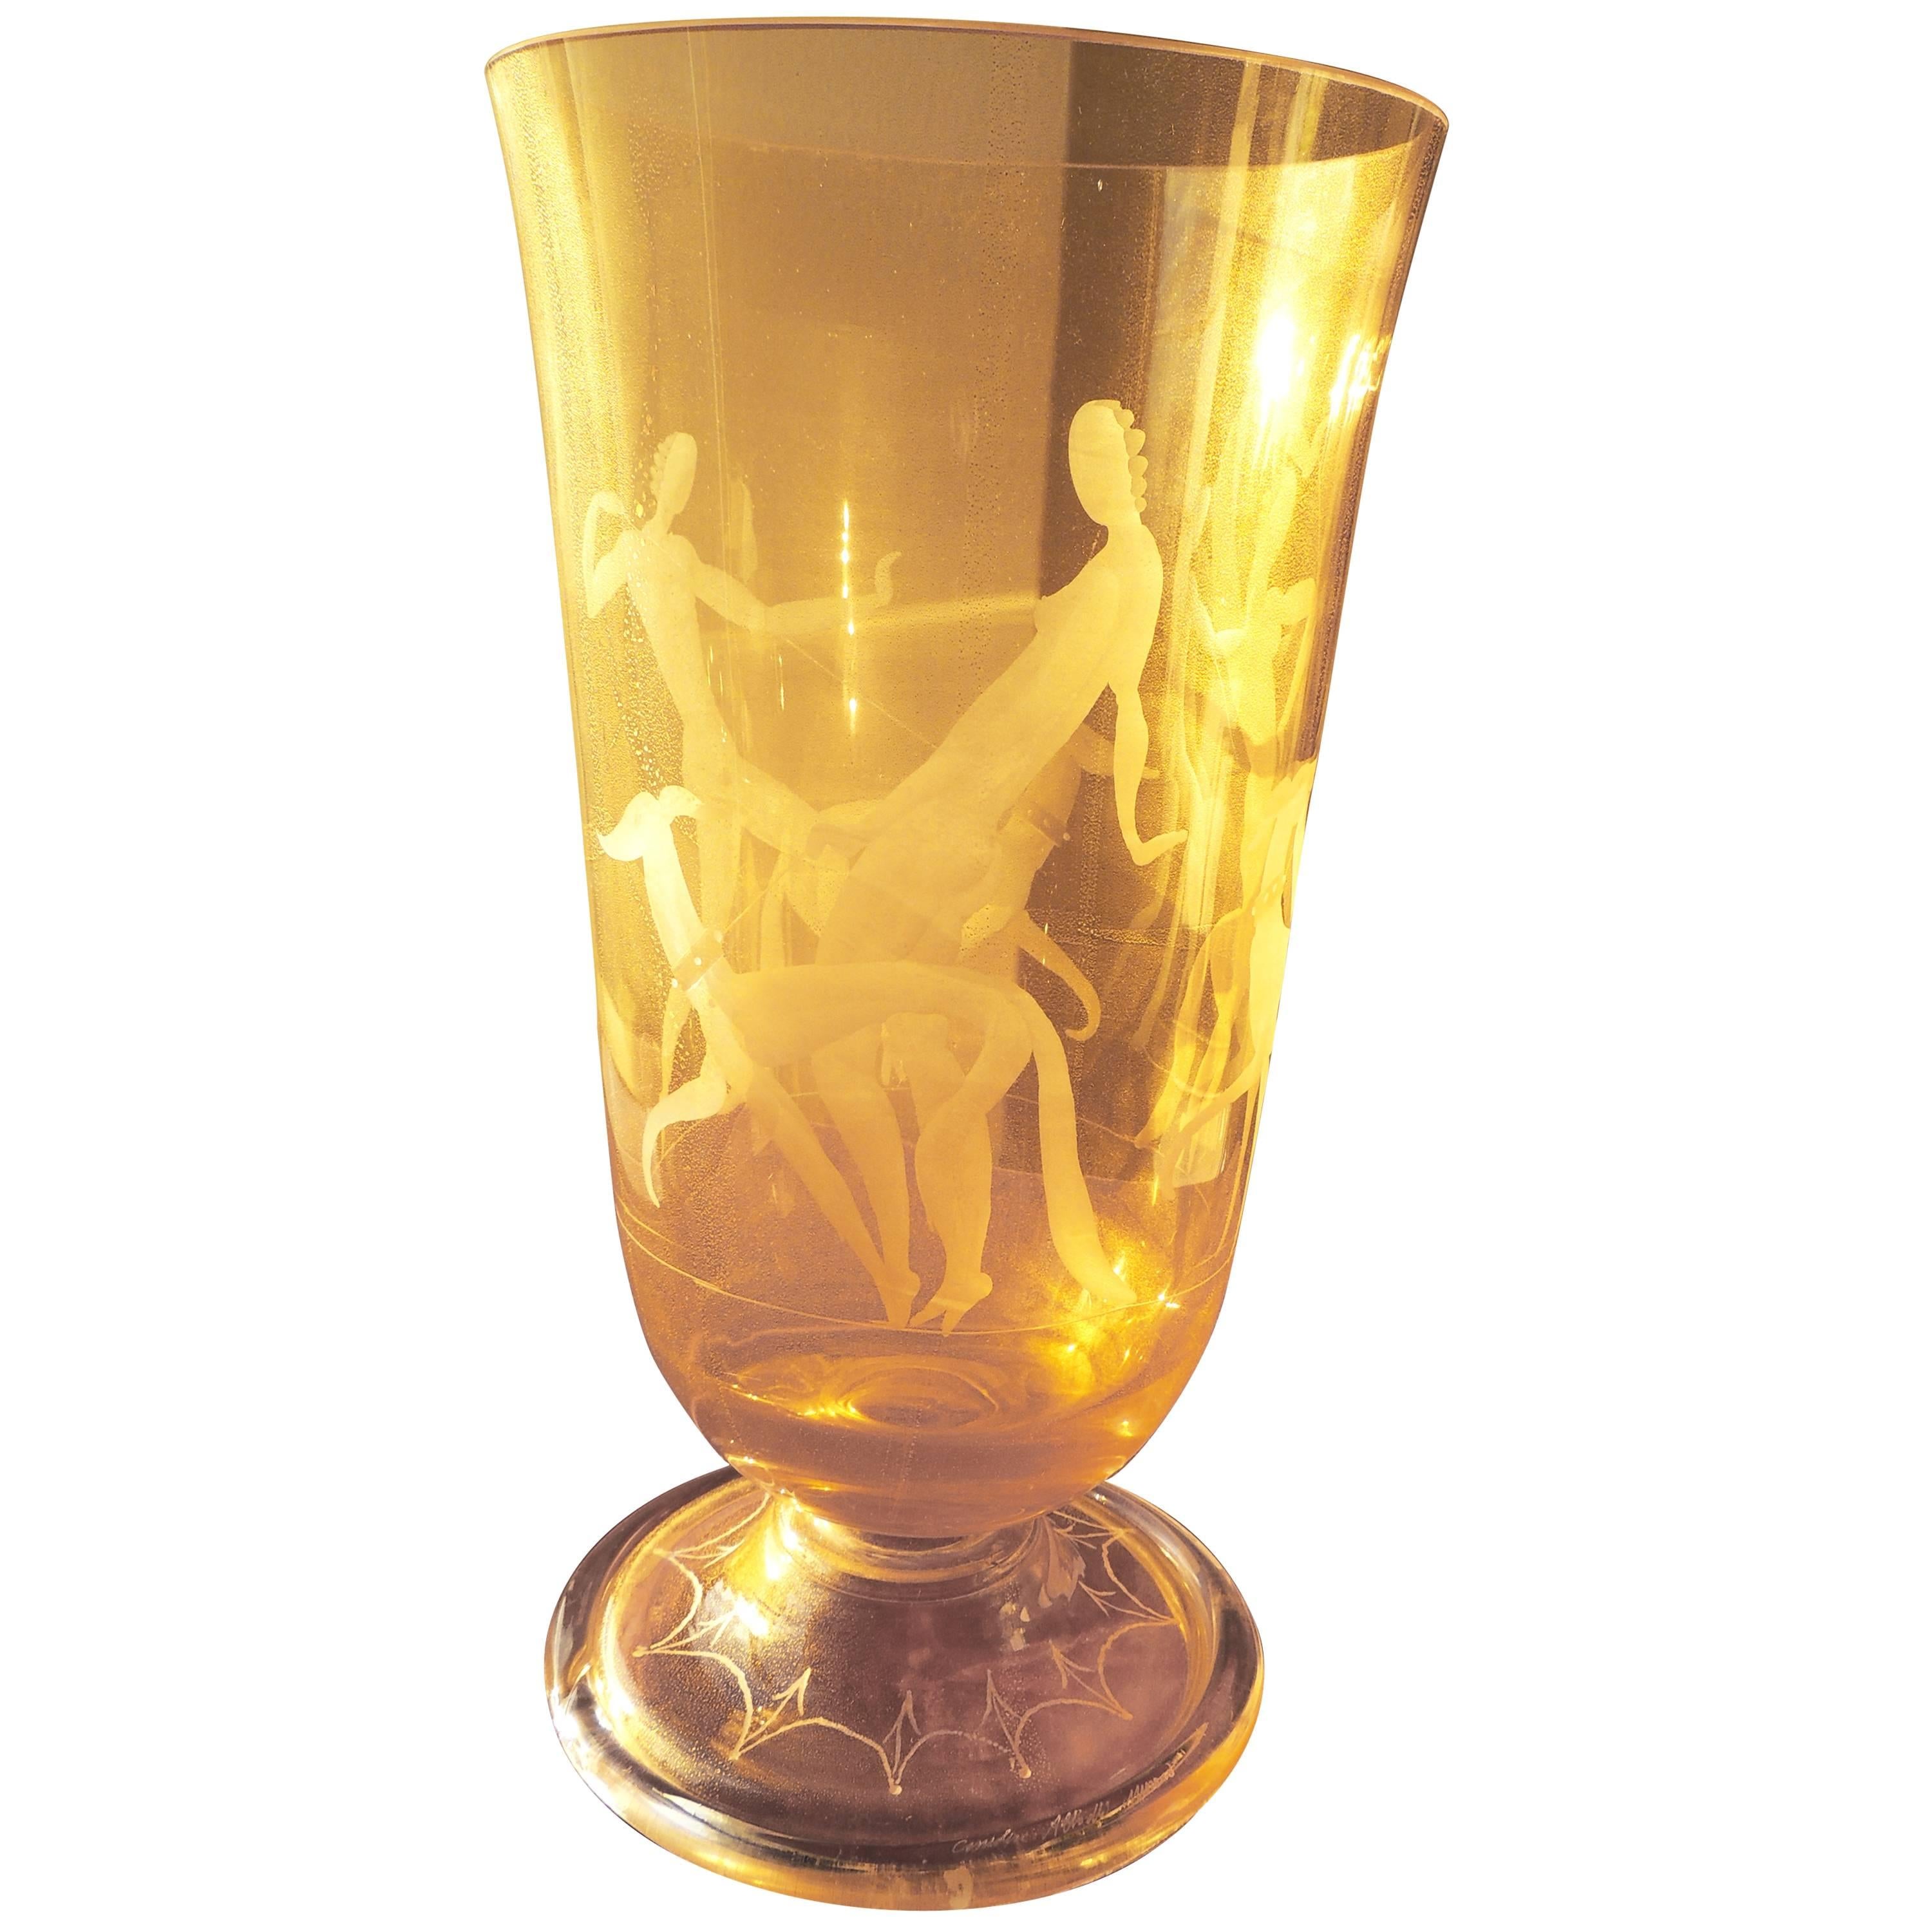 Art Deco Etched Glass Vase with Stylized Women and Dogs